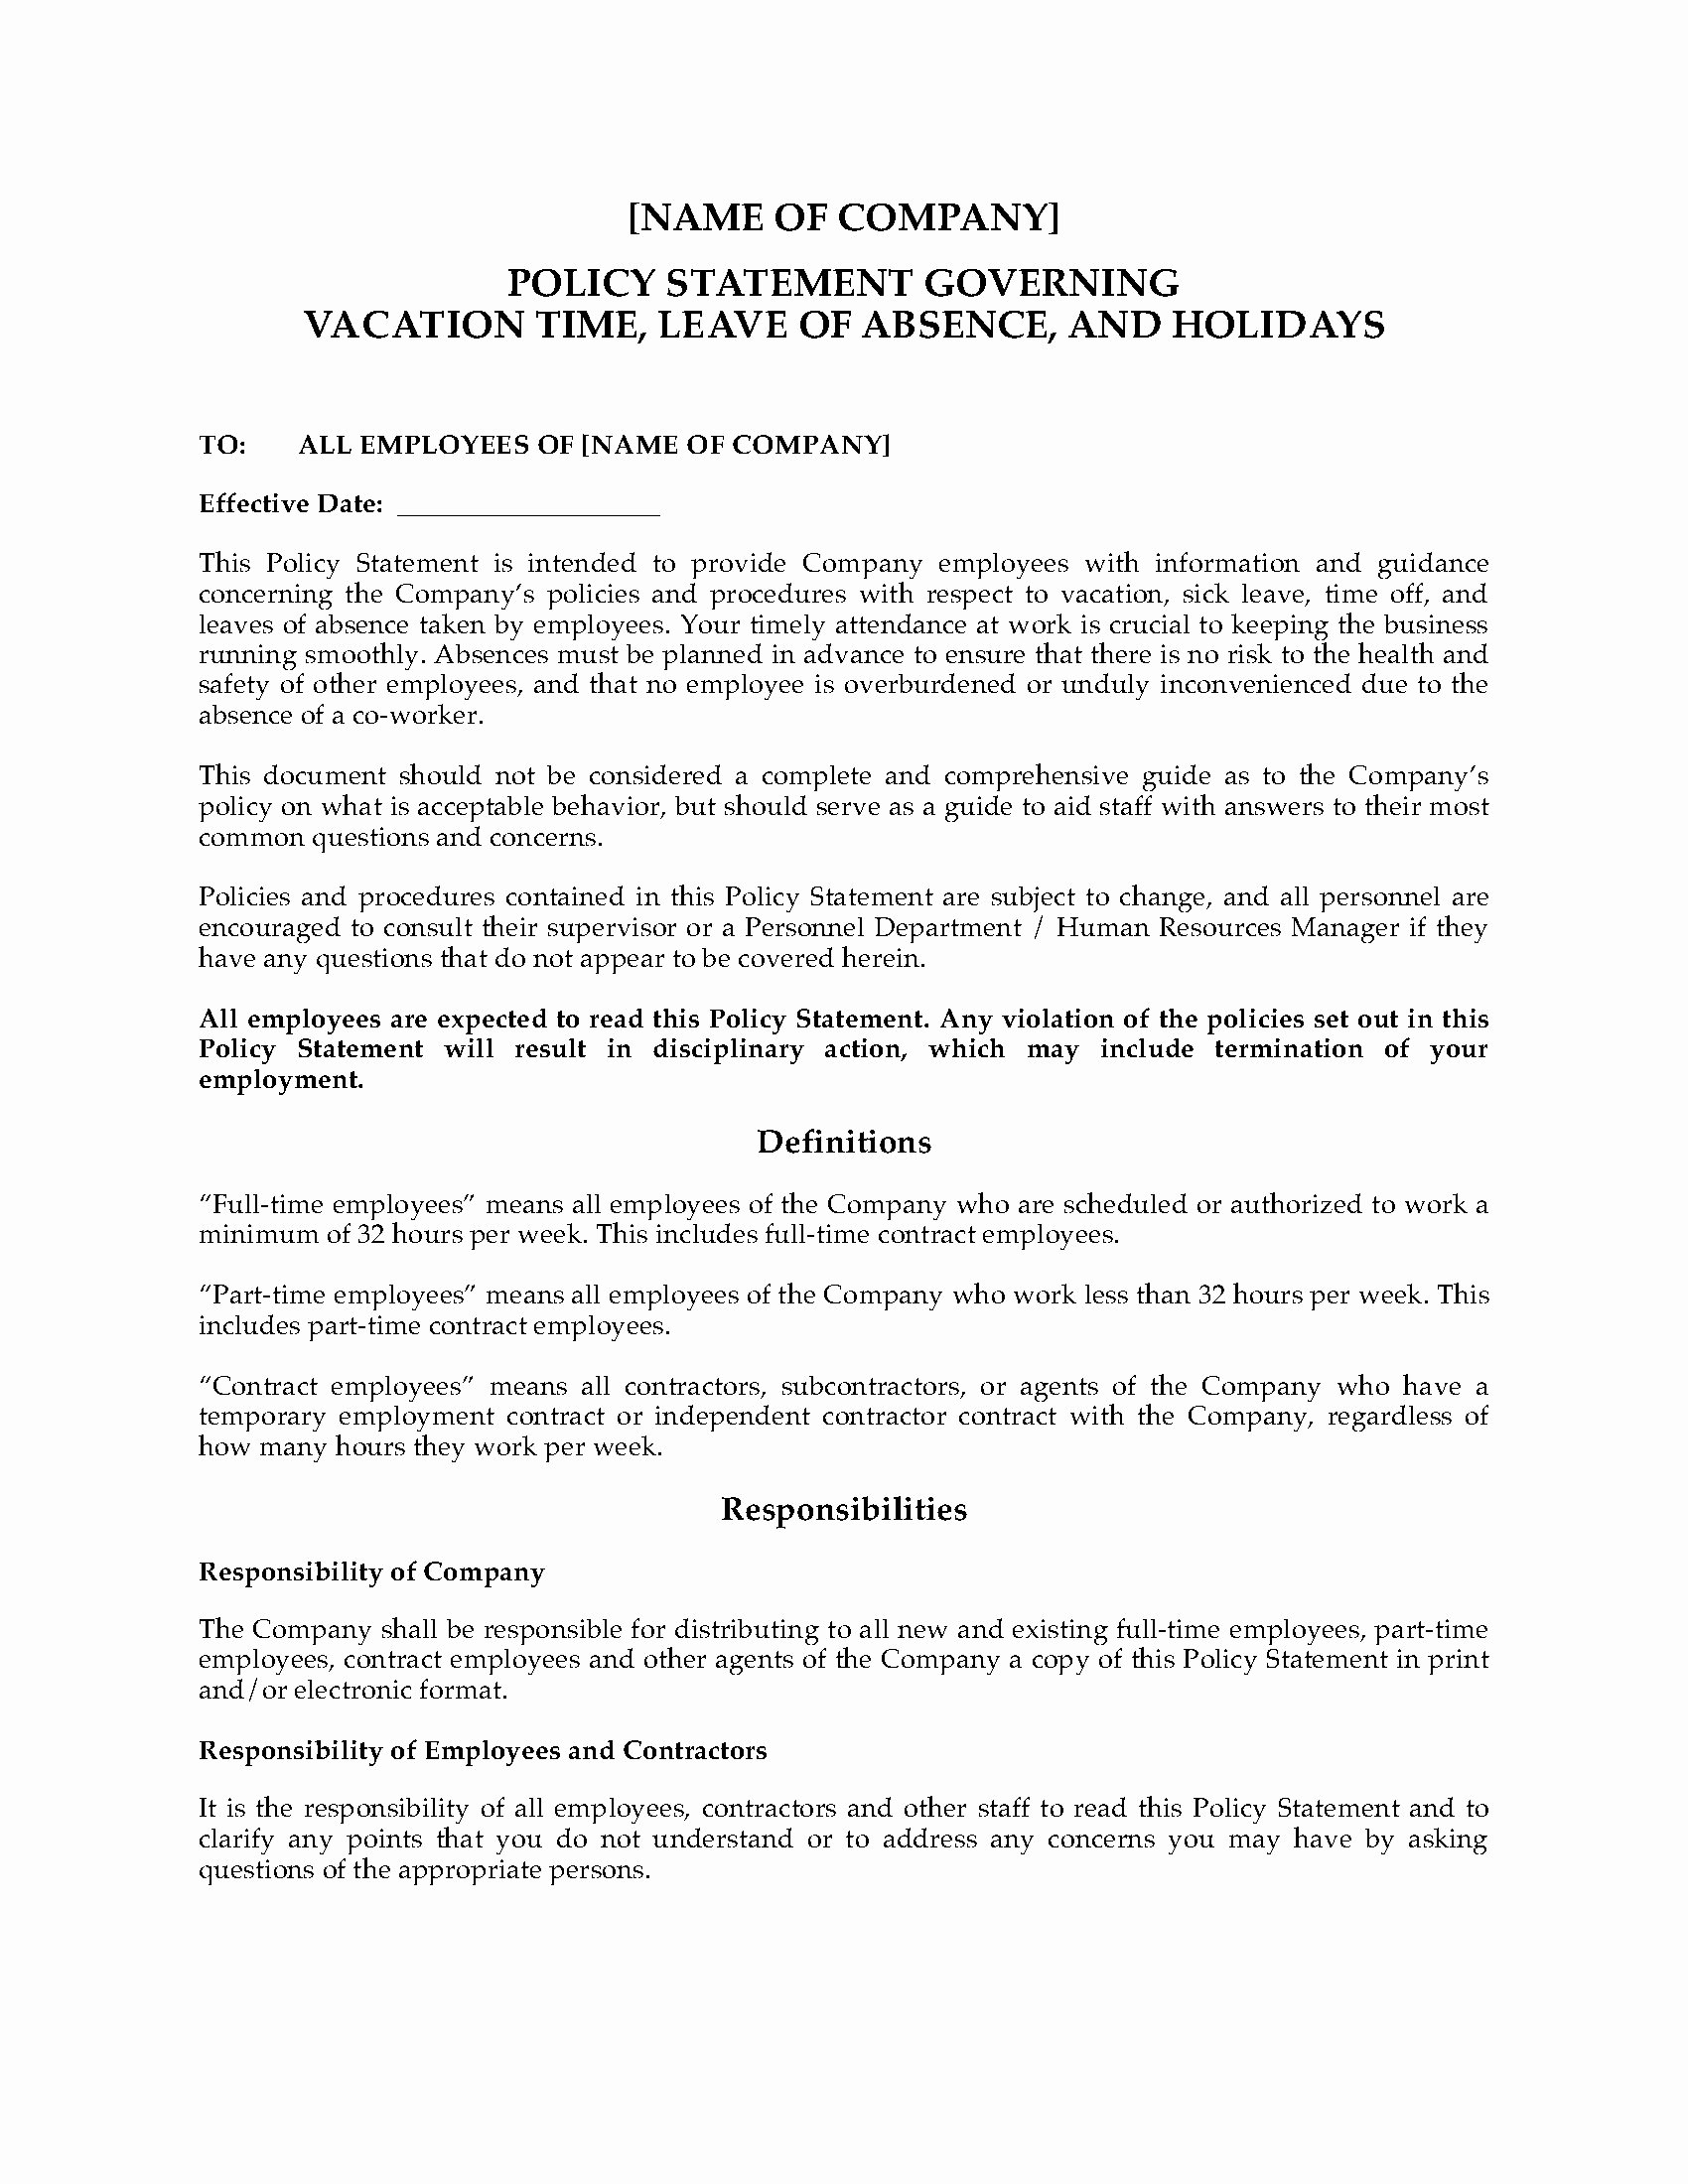 Vacation Policy Template Beautiful Vacation Leave Of Absence and Holiday Policy Statement